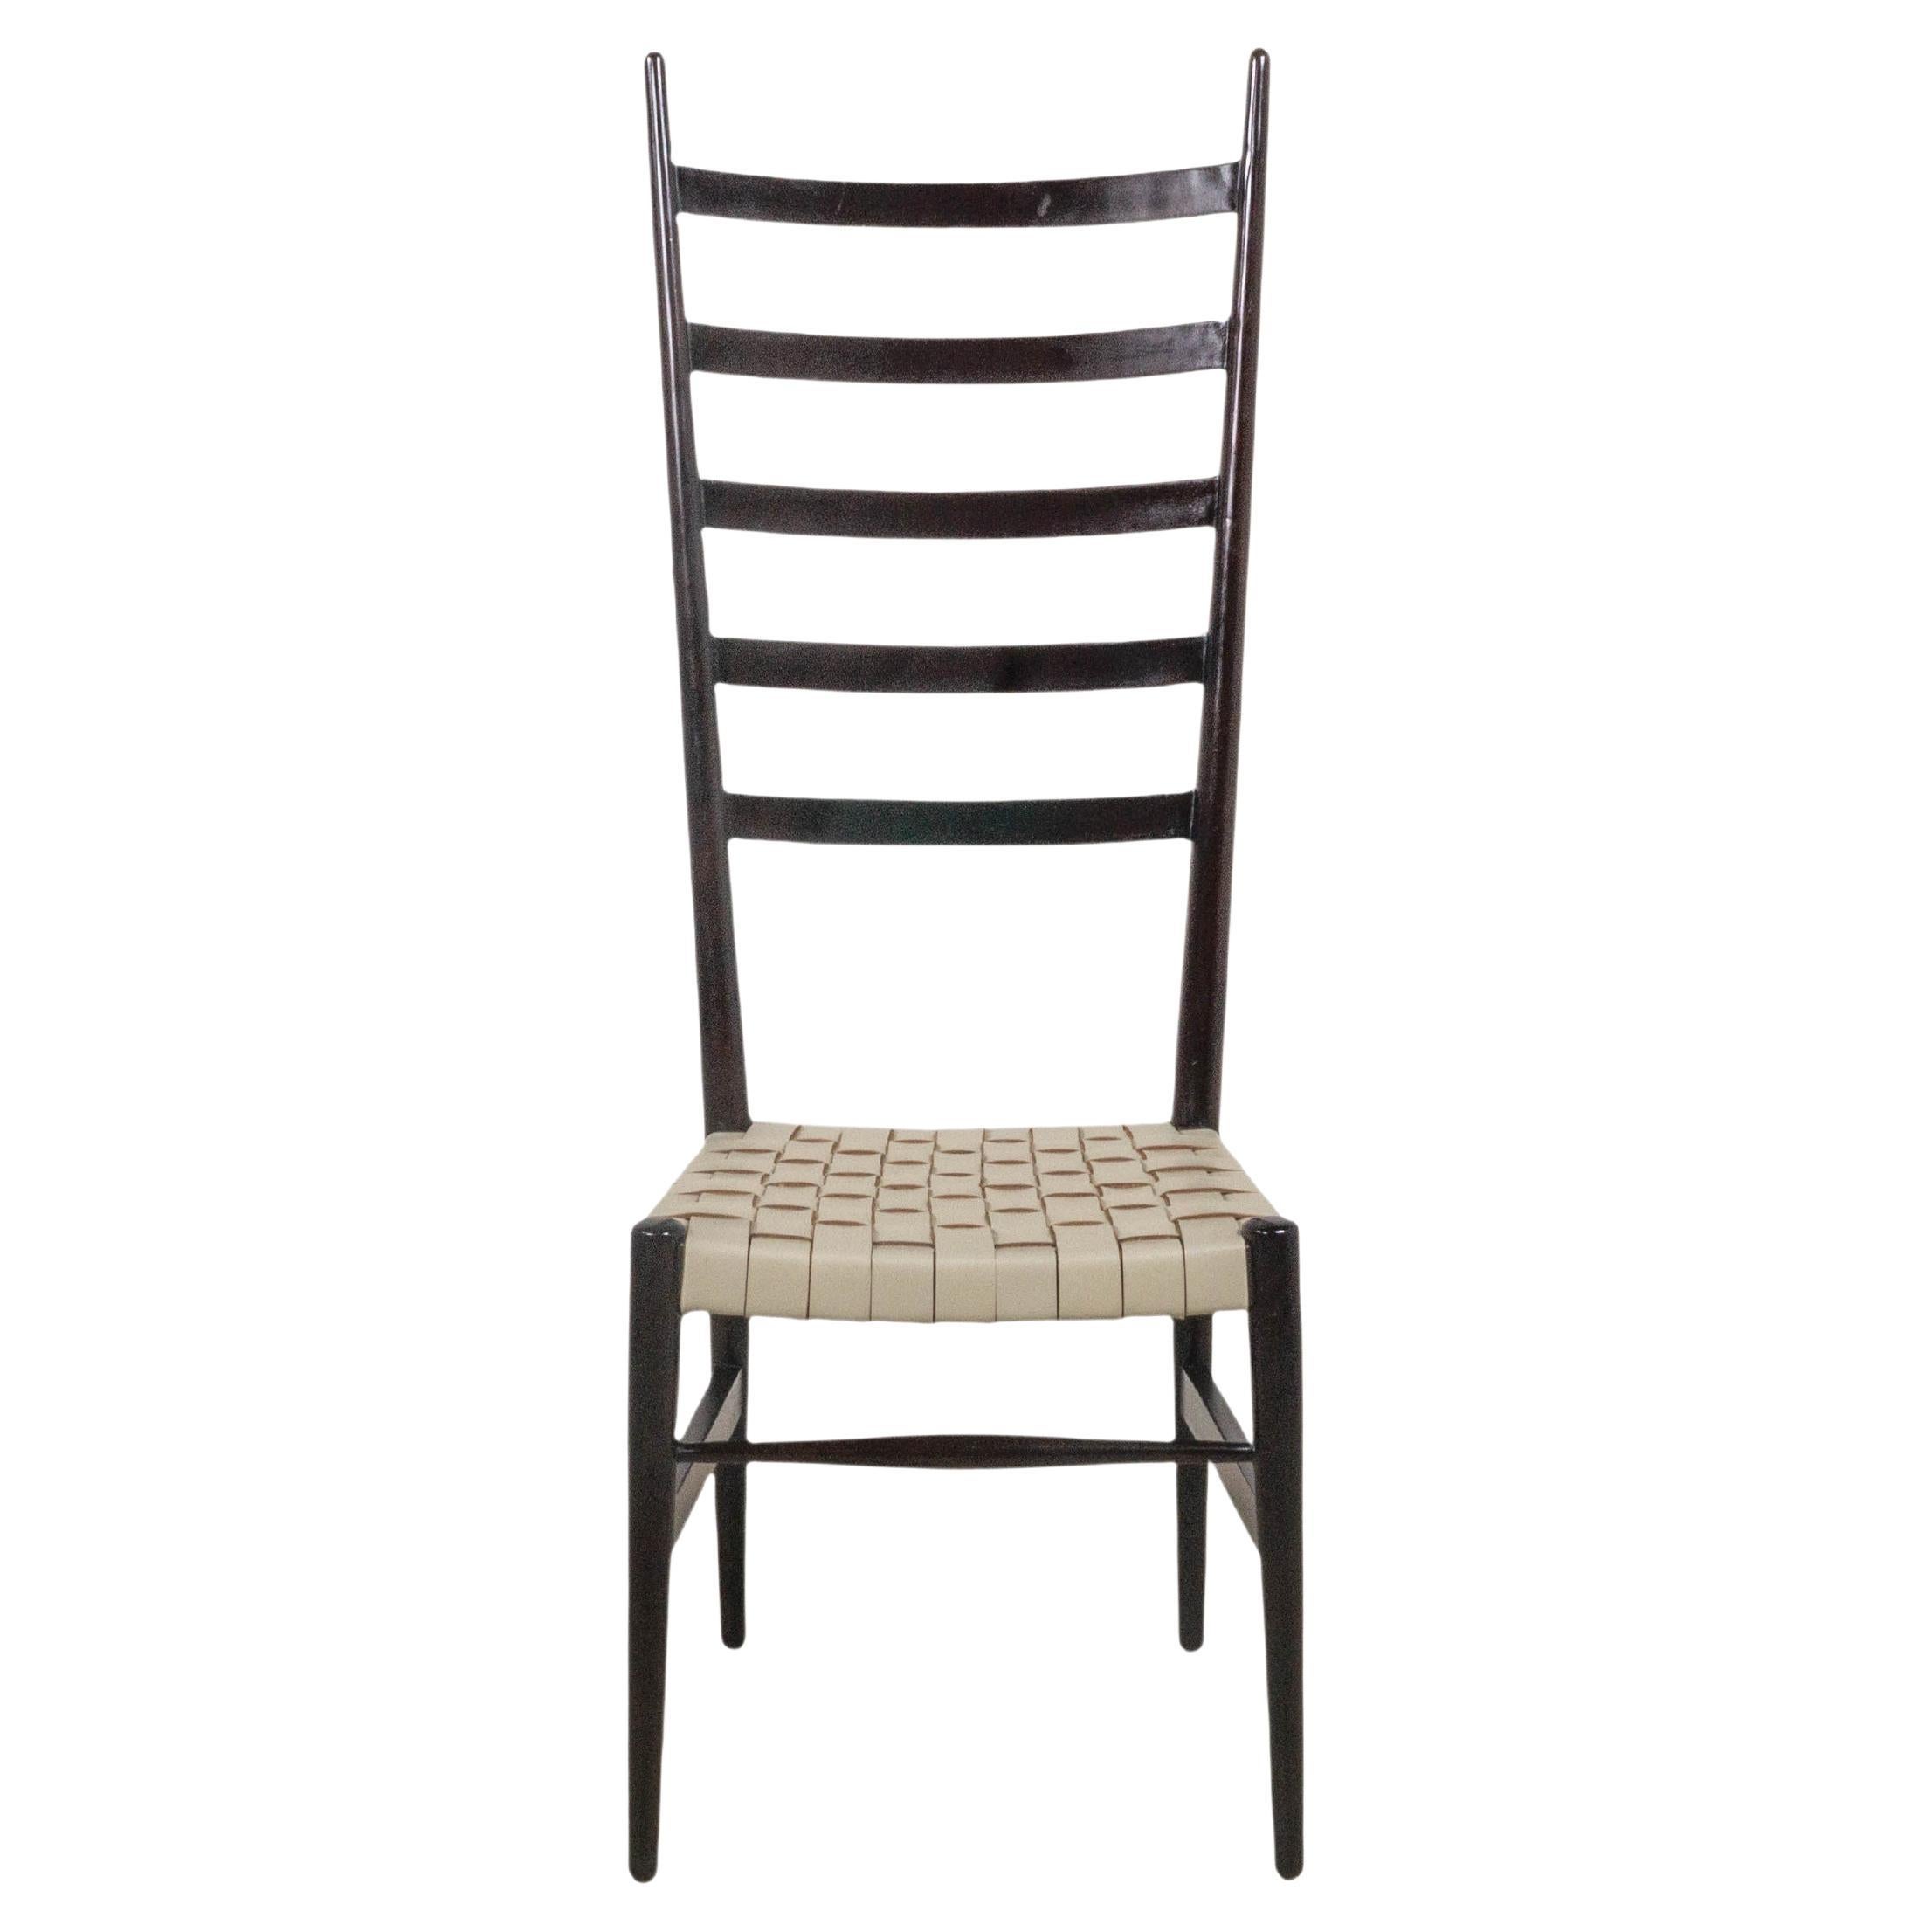 The otto Gerdan set of 8 dining chairs with basket-weave leather seats and black ladder back from Italy circa 1970 is a truly luxurious piece. The chairs feature handwoven leather seats the the basket-weave style that are both comfortable and